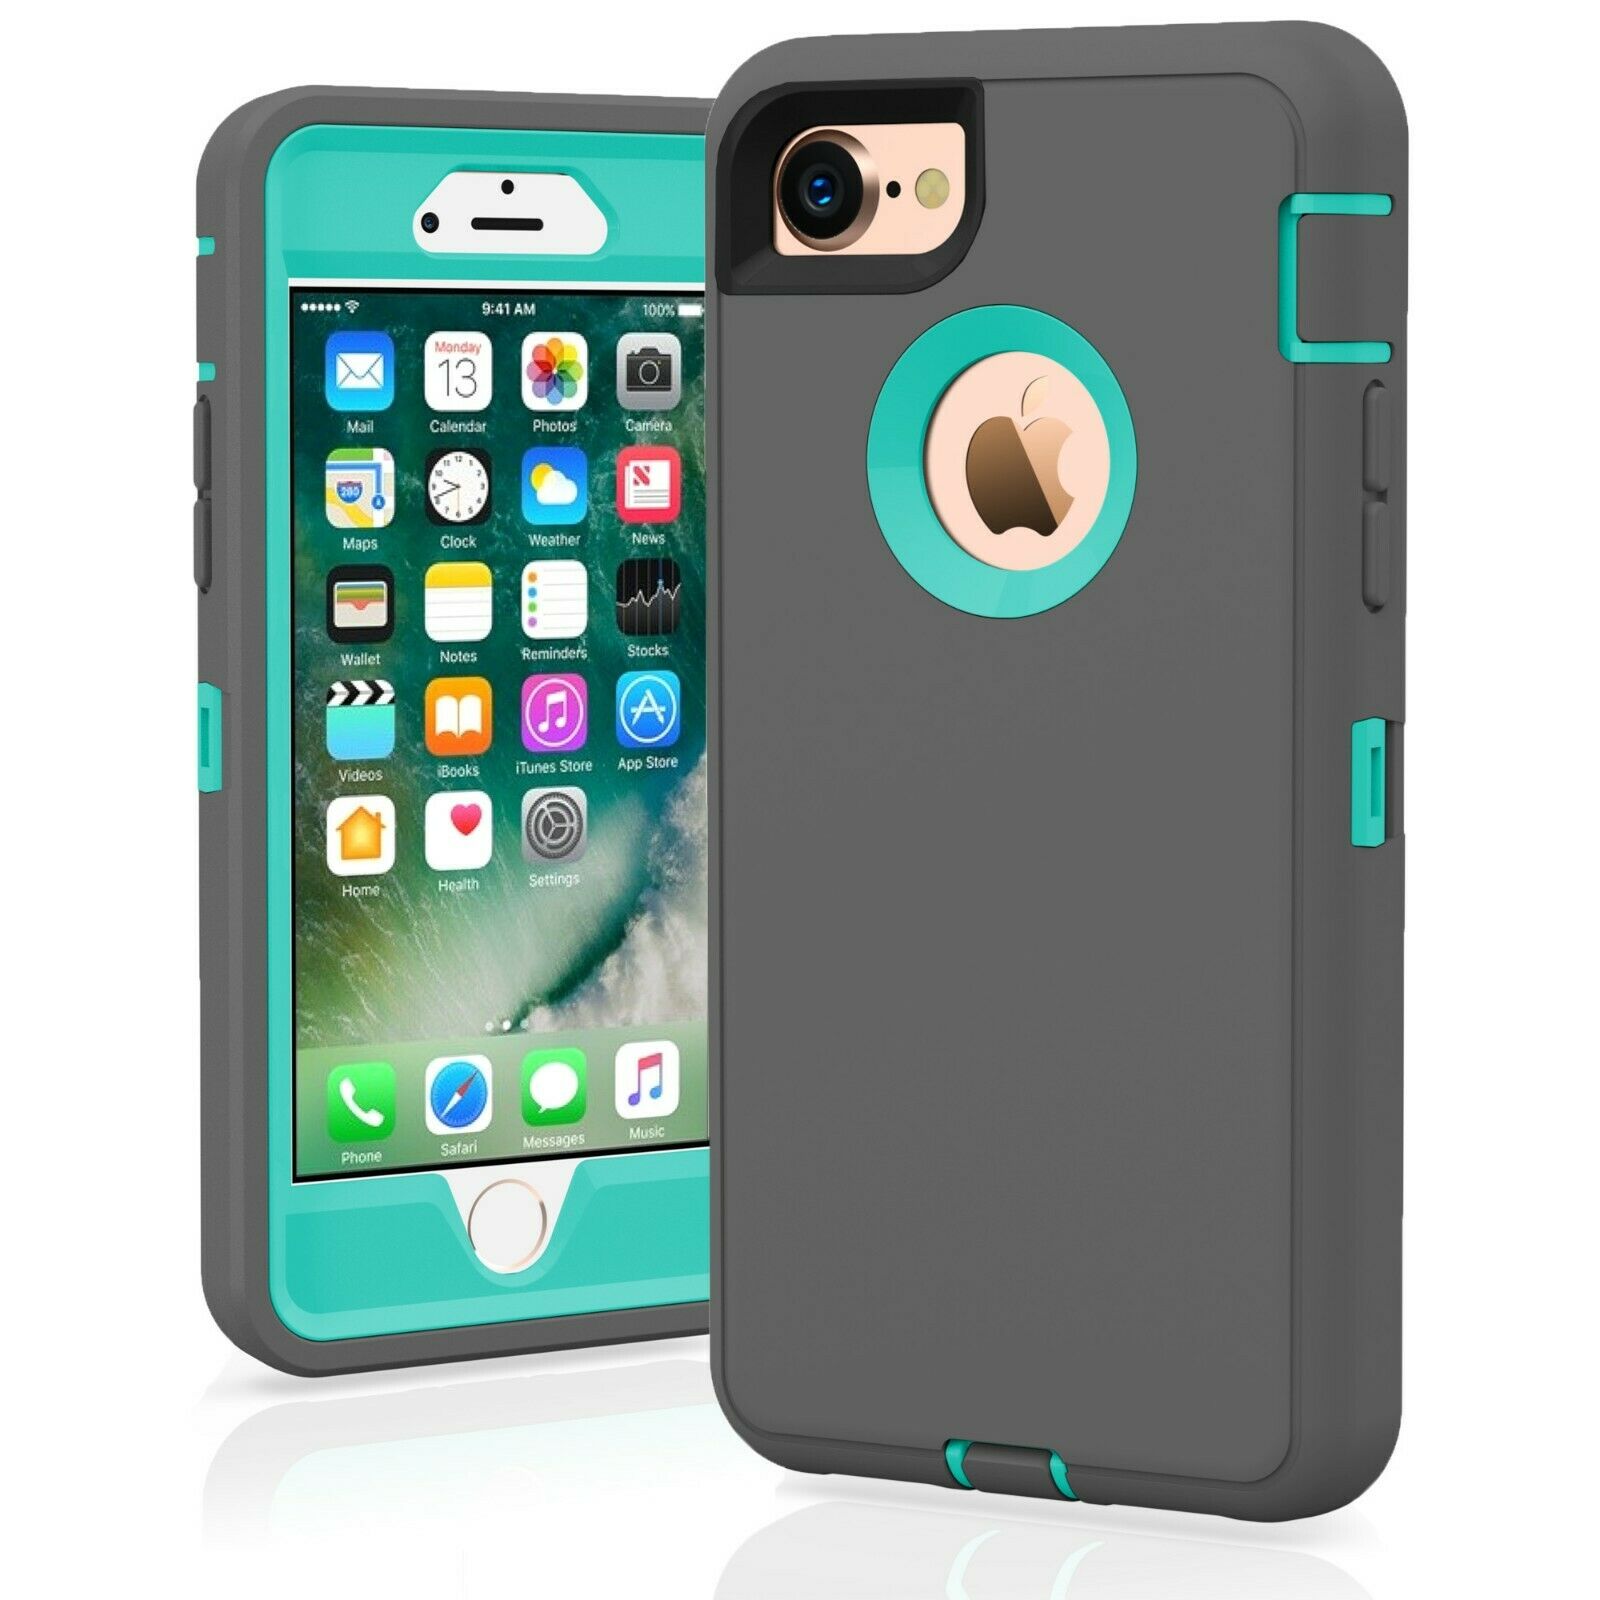 For iPhone 7 / 7 Plus 8 / 8 Plus Case Cover Protective Hybrid Rugged Shockproof alphaaccessmobile For iPhone 7 GREY TEAL 